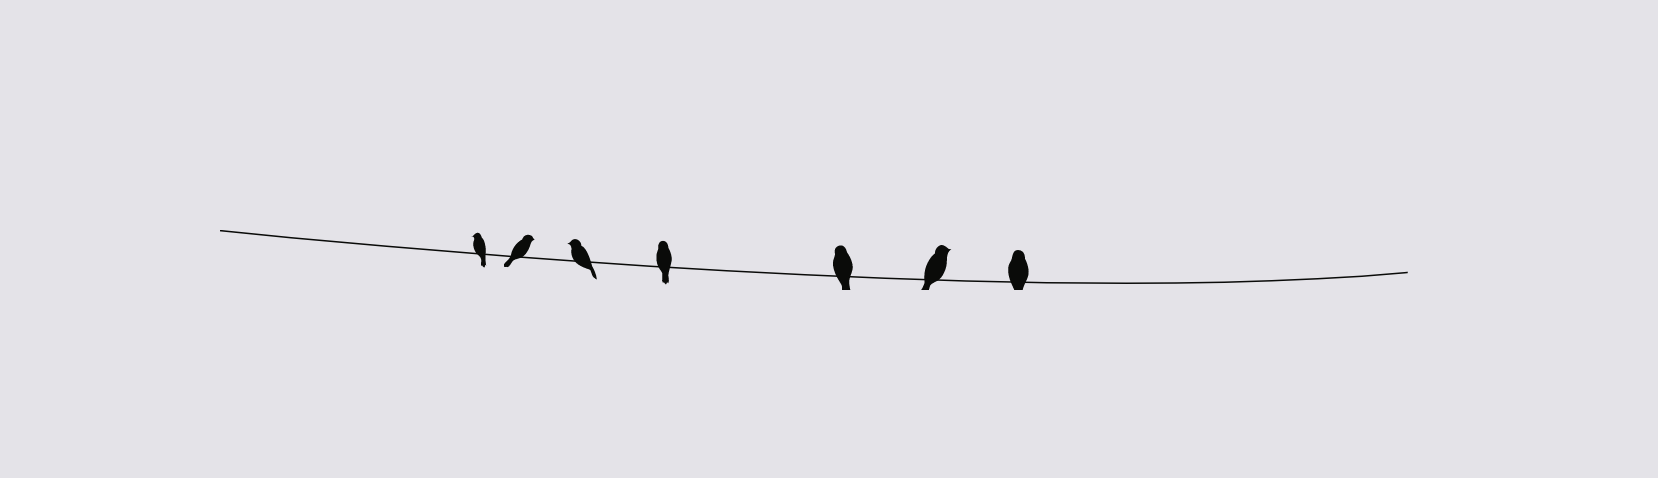 The horizontal rule style I am using on my Web site. It is a vector illustration of a few bird silhouettes standing on a curvey horizontal black wire.